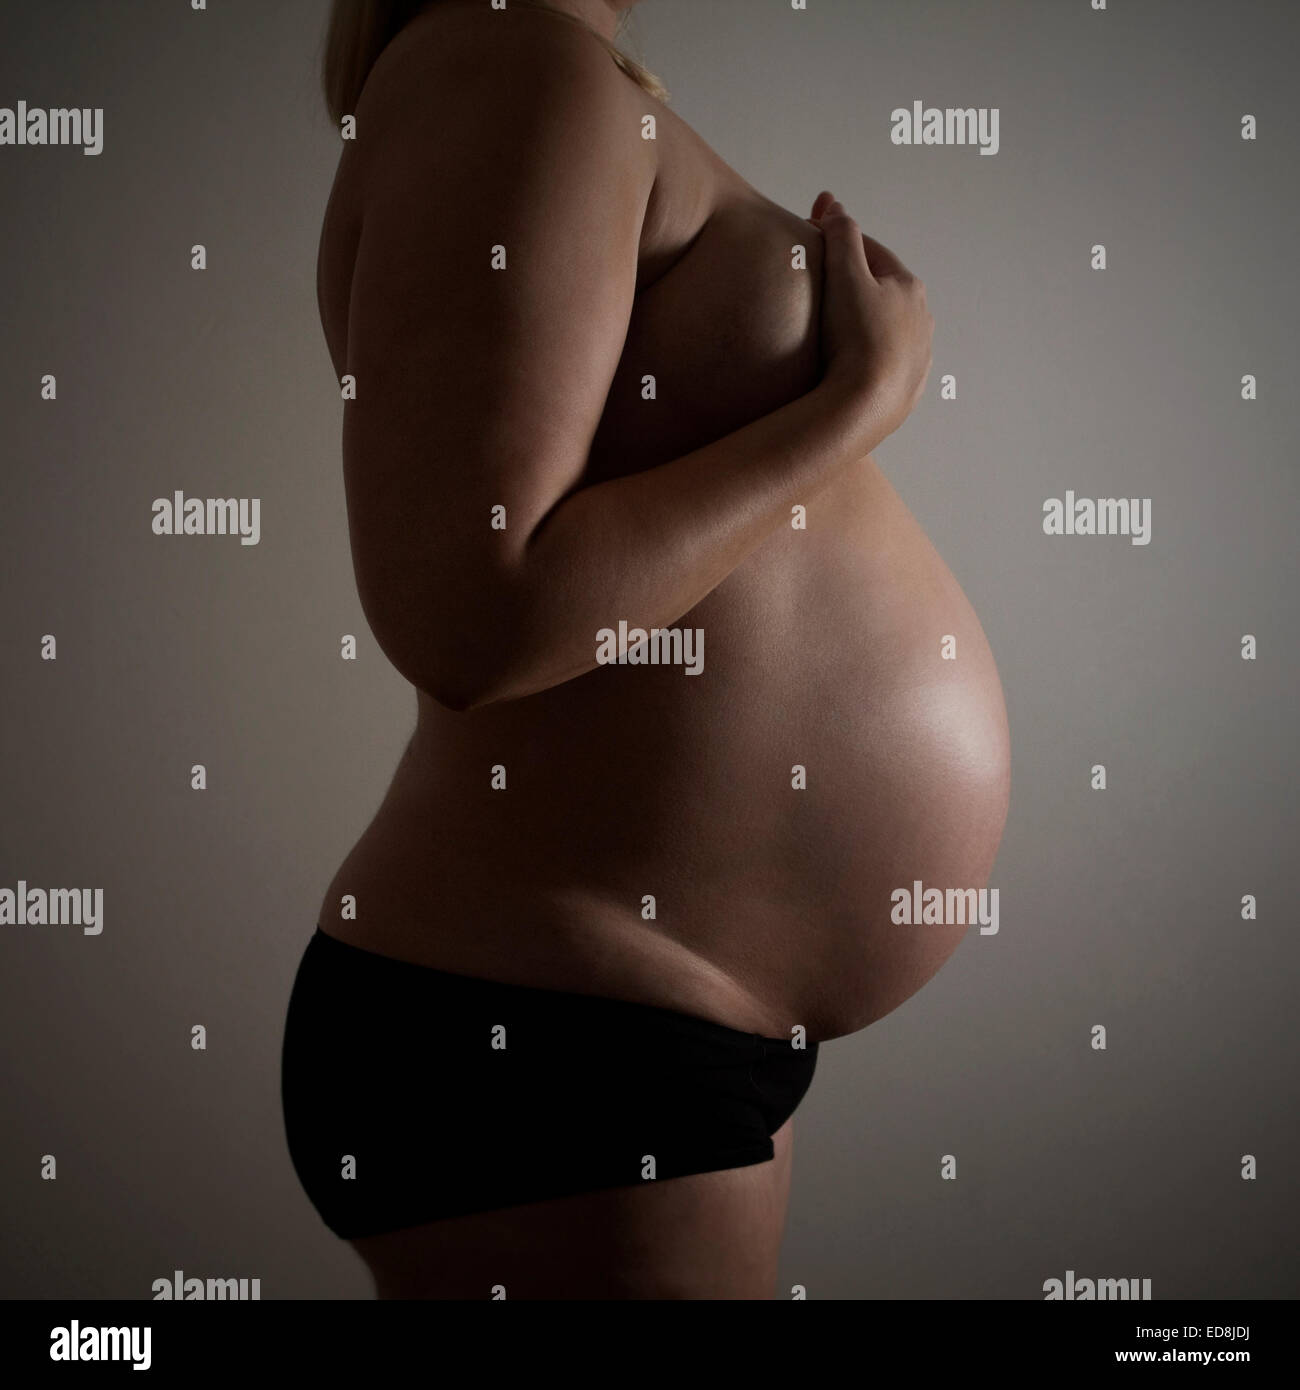 Side shot of heavily pregnant woman at 37 weeks gestation Stock Photo